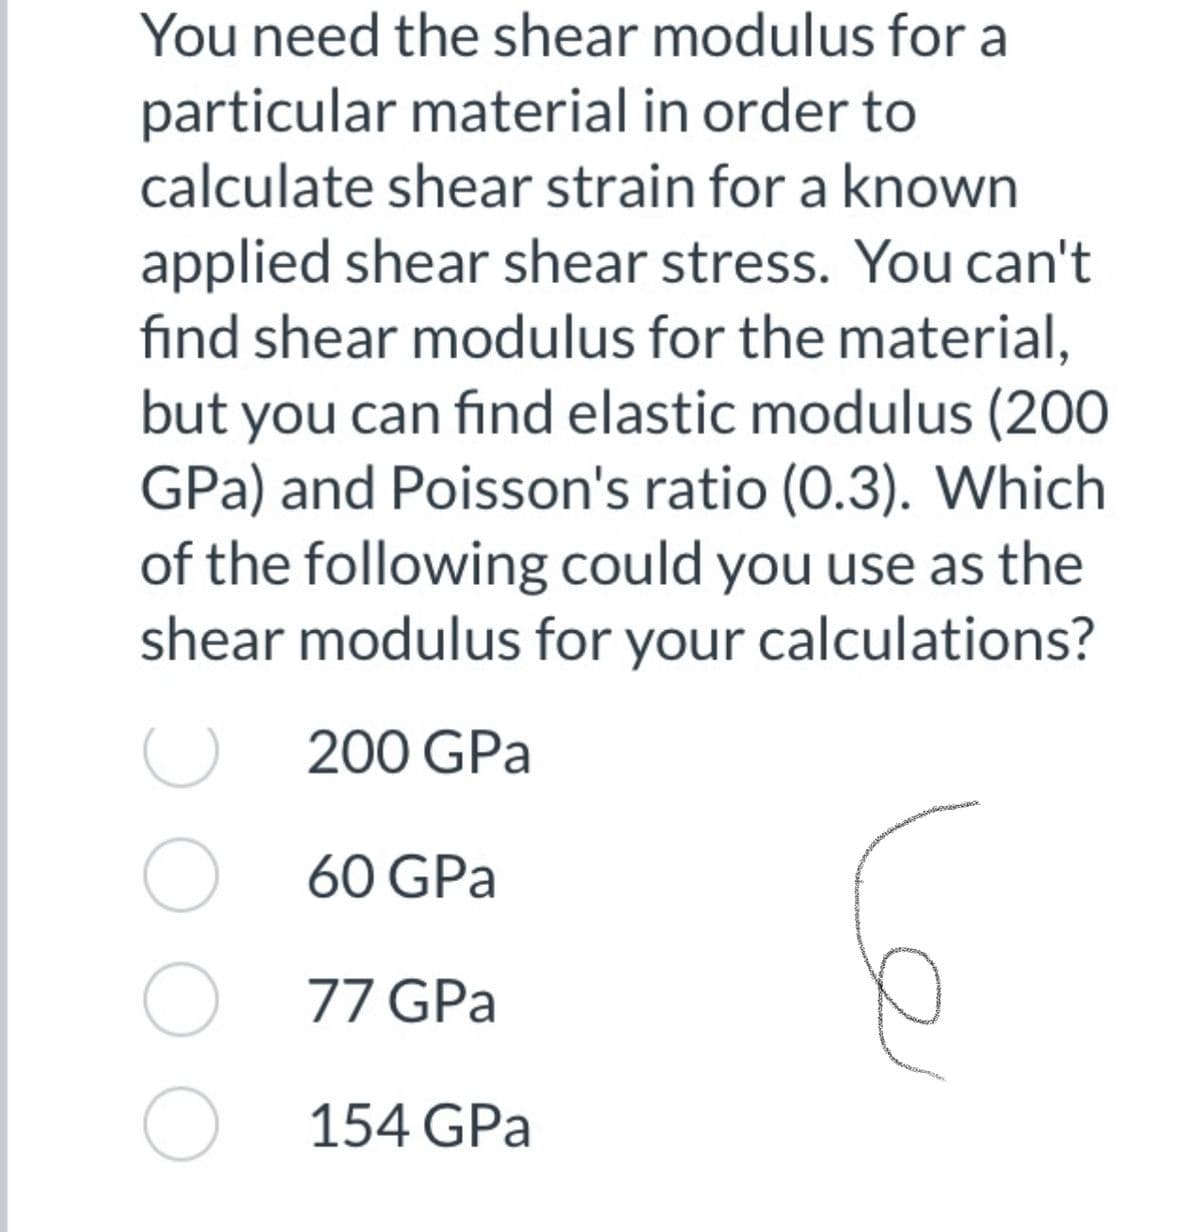 You need the shear modulus for a
particular material in order to
calculate shear strain for a known
applied shear shear stress. You can't
find shear modulus for the material,
but you can find elastic modulus (200
GPa) and Poisson's ratio (0.3). Which
of the following could you use as the
shear modulus for your calculations?
200 GPa
O 60 GPa
O 77 GPa
O 154 GPa
